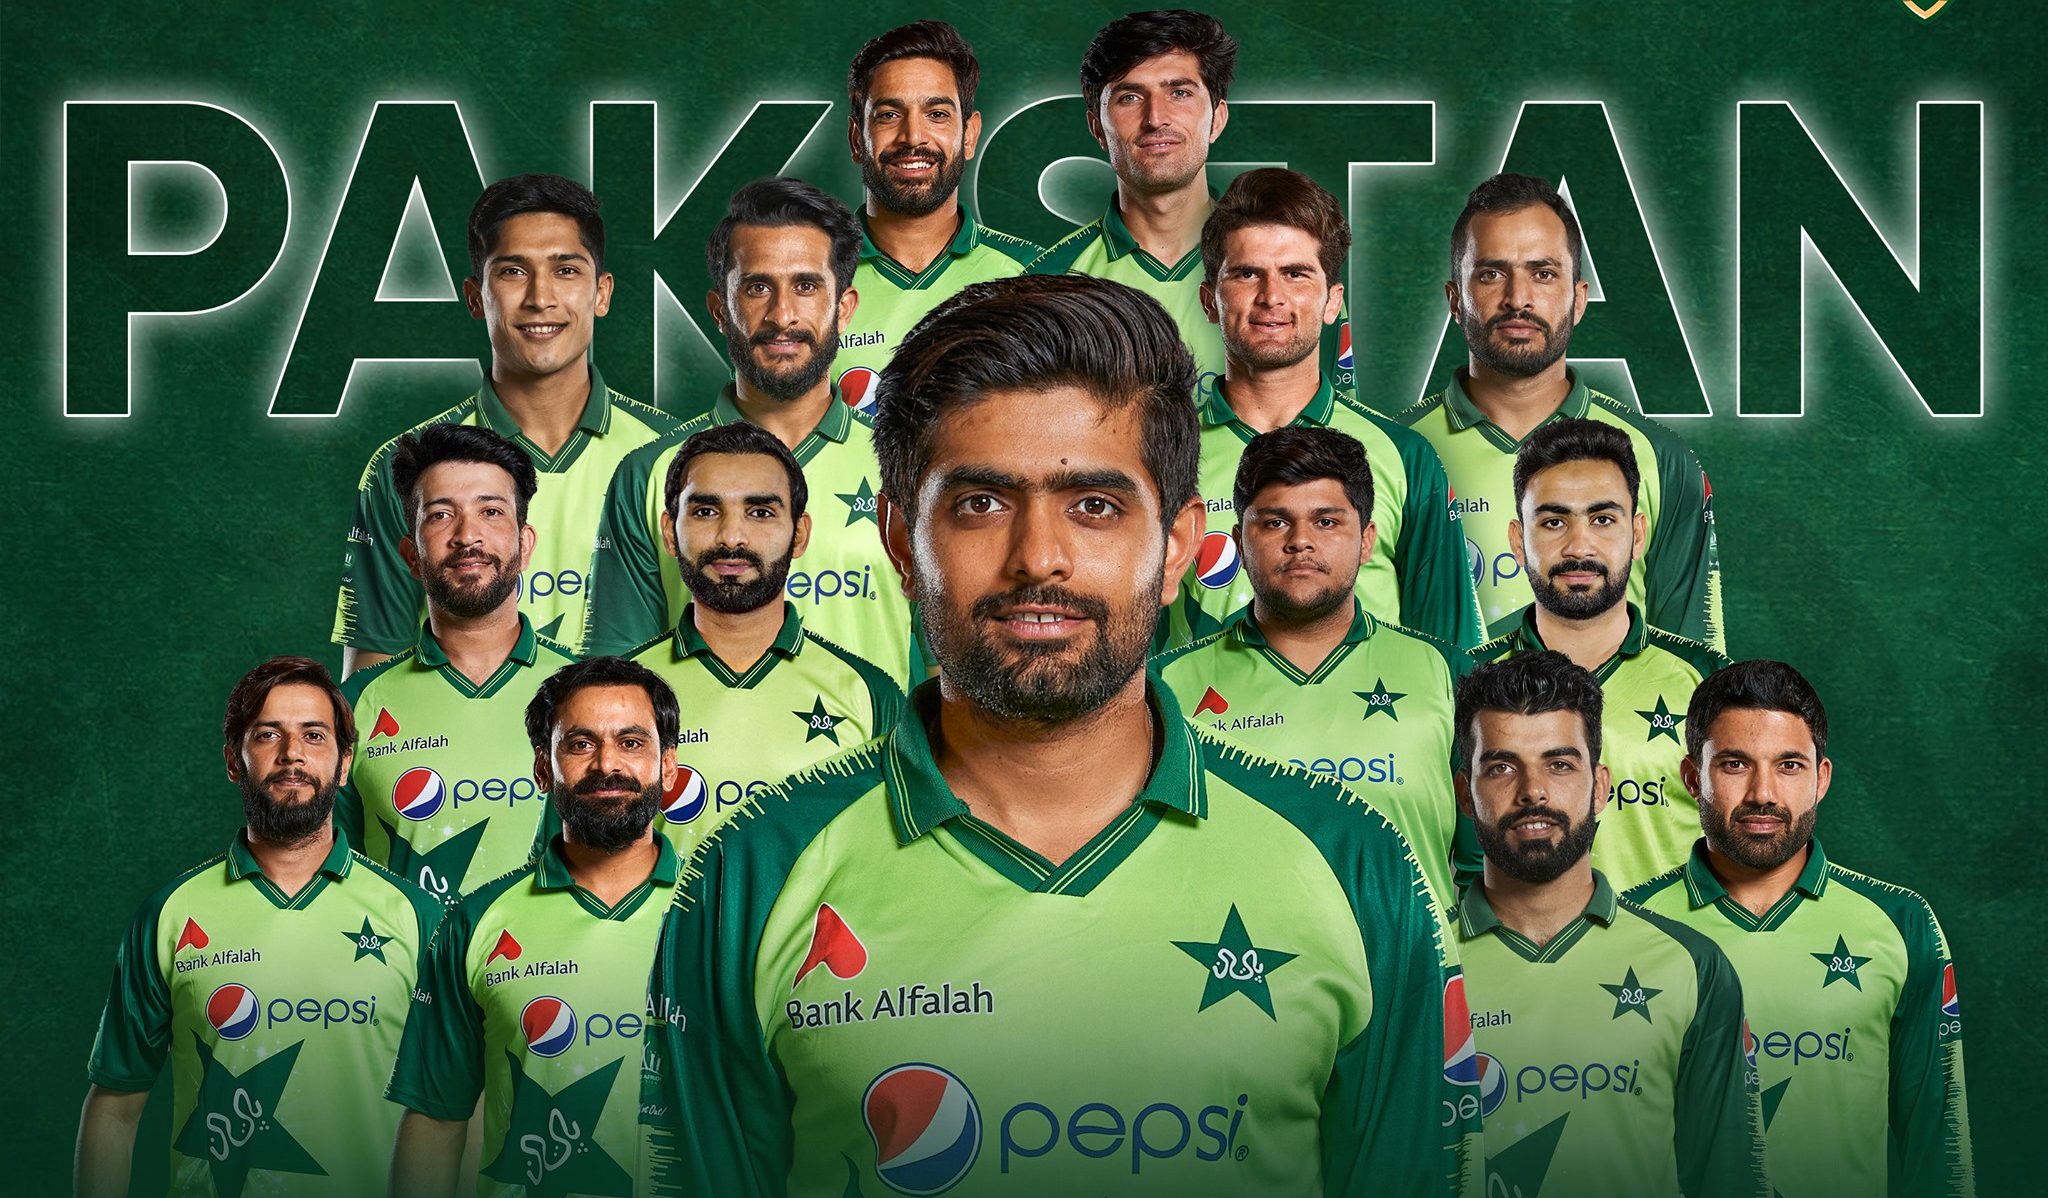 Men's T20 World Cup 2022 Pakistan Team Squad, Players List, Playing 11